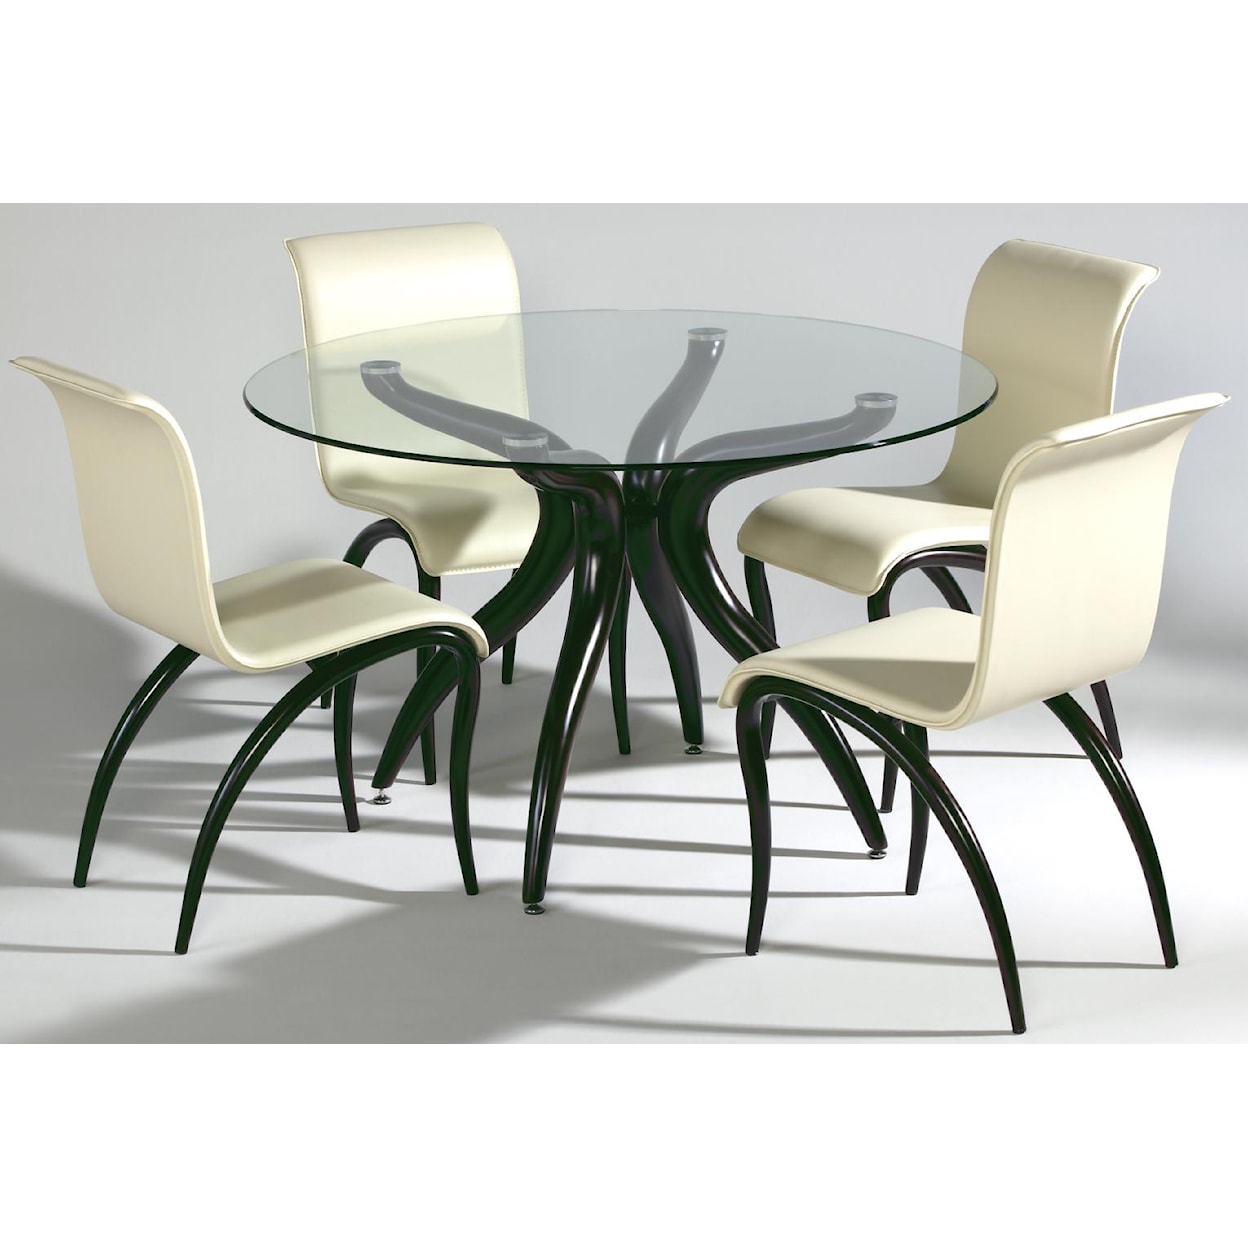 Chintaly Imports Judith Dining Side Chair